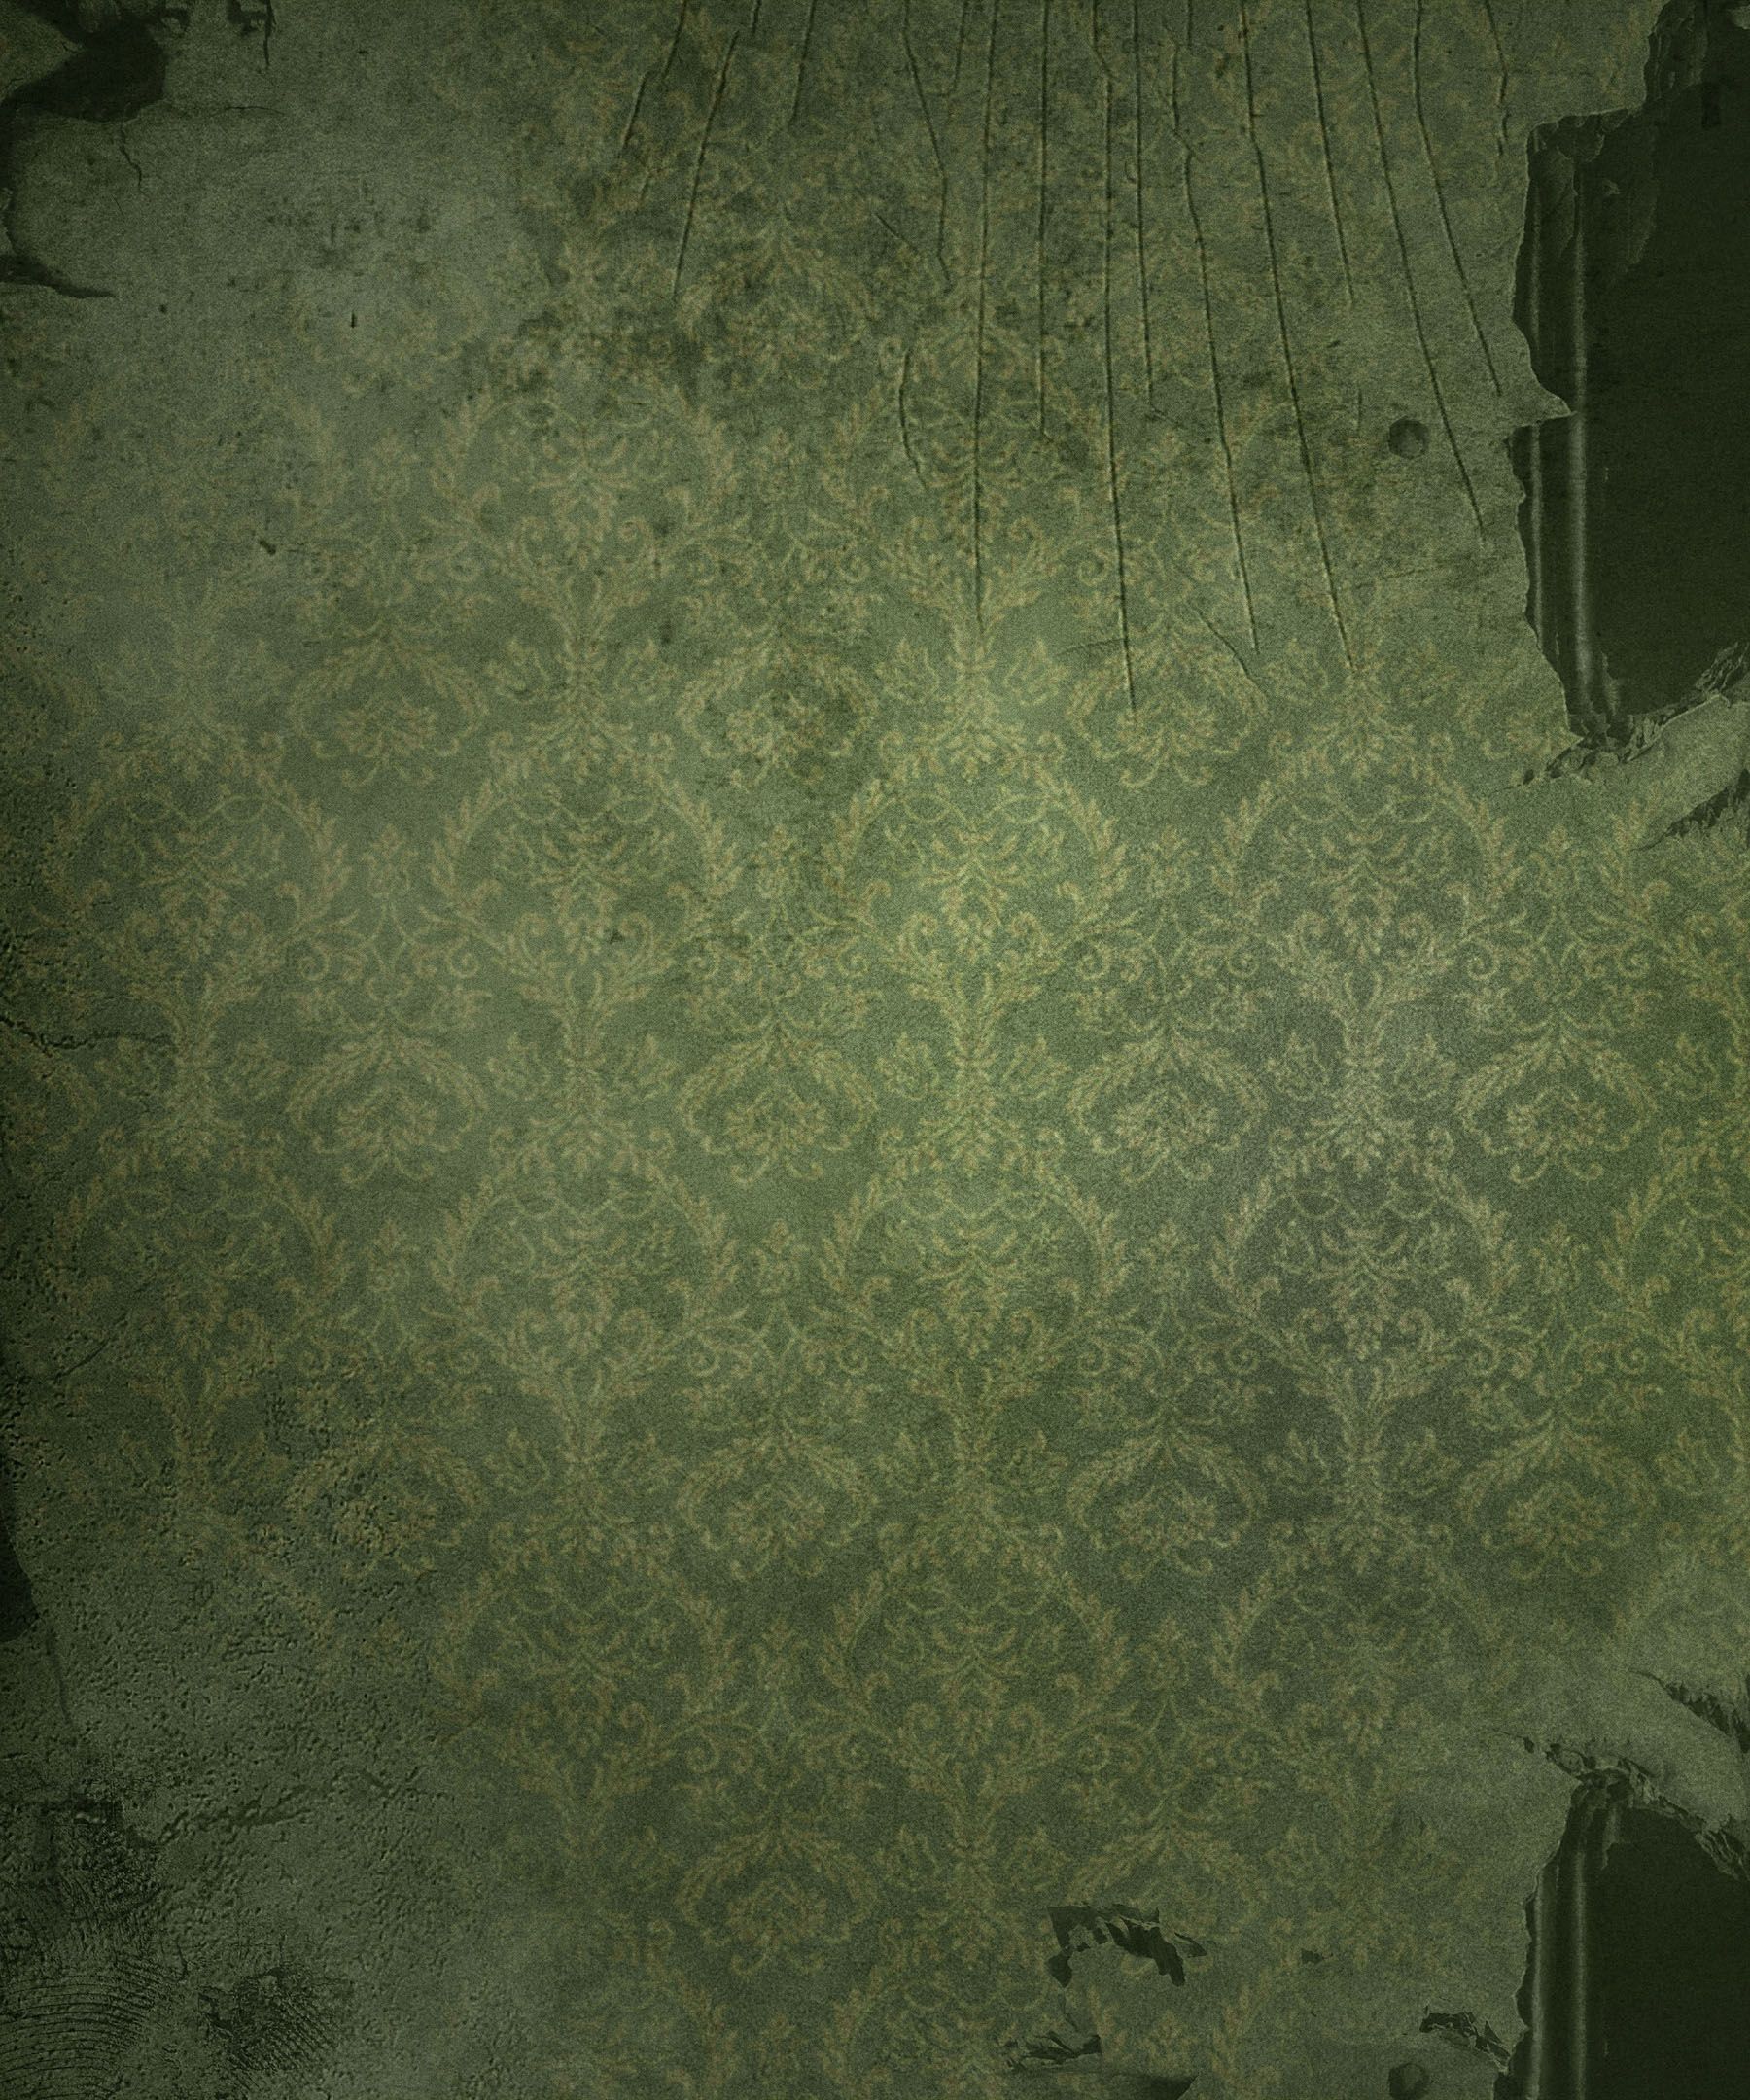 Old European-style wall wallpaper 11050 - Background patterns - Others